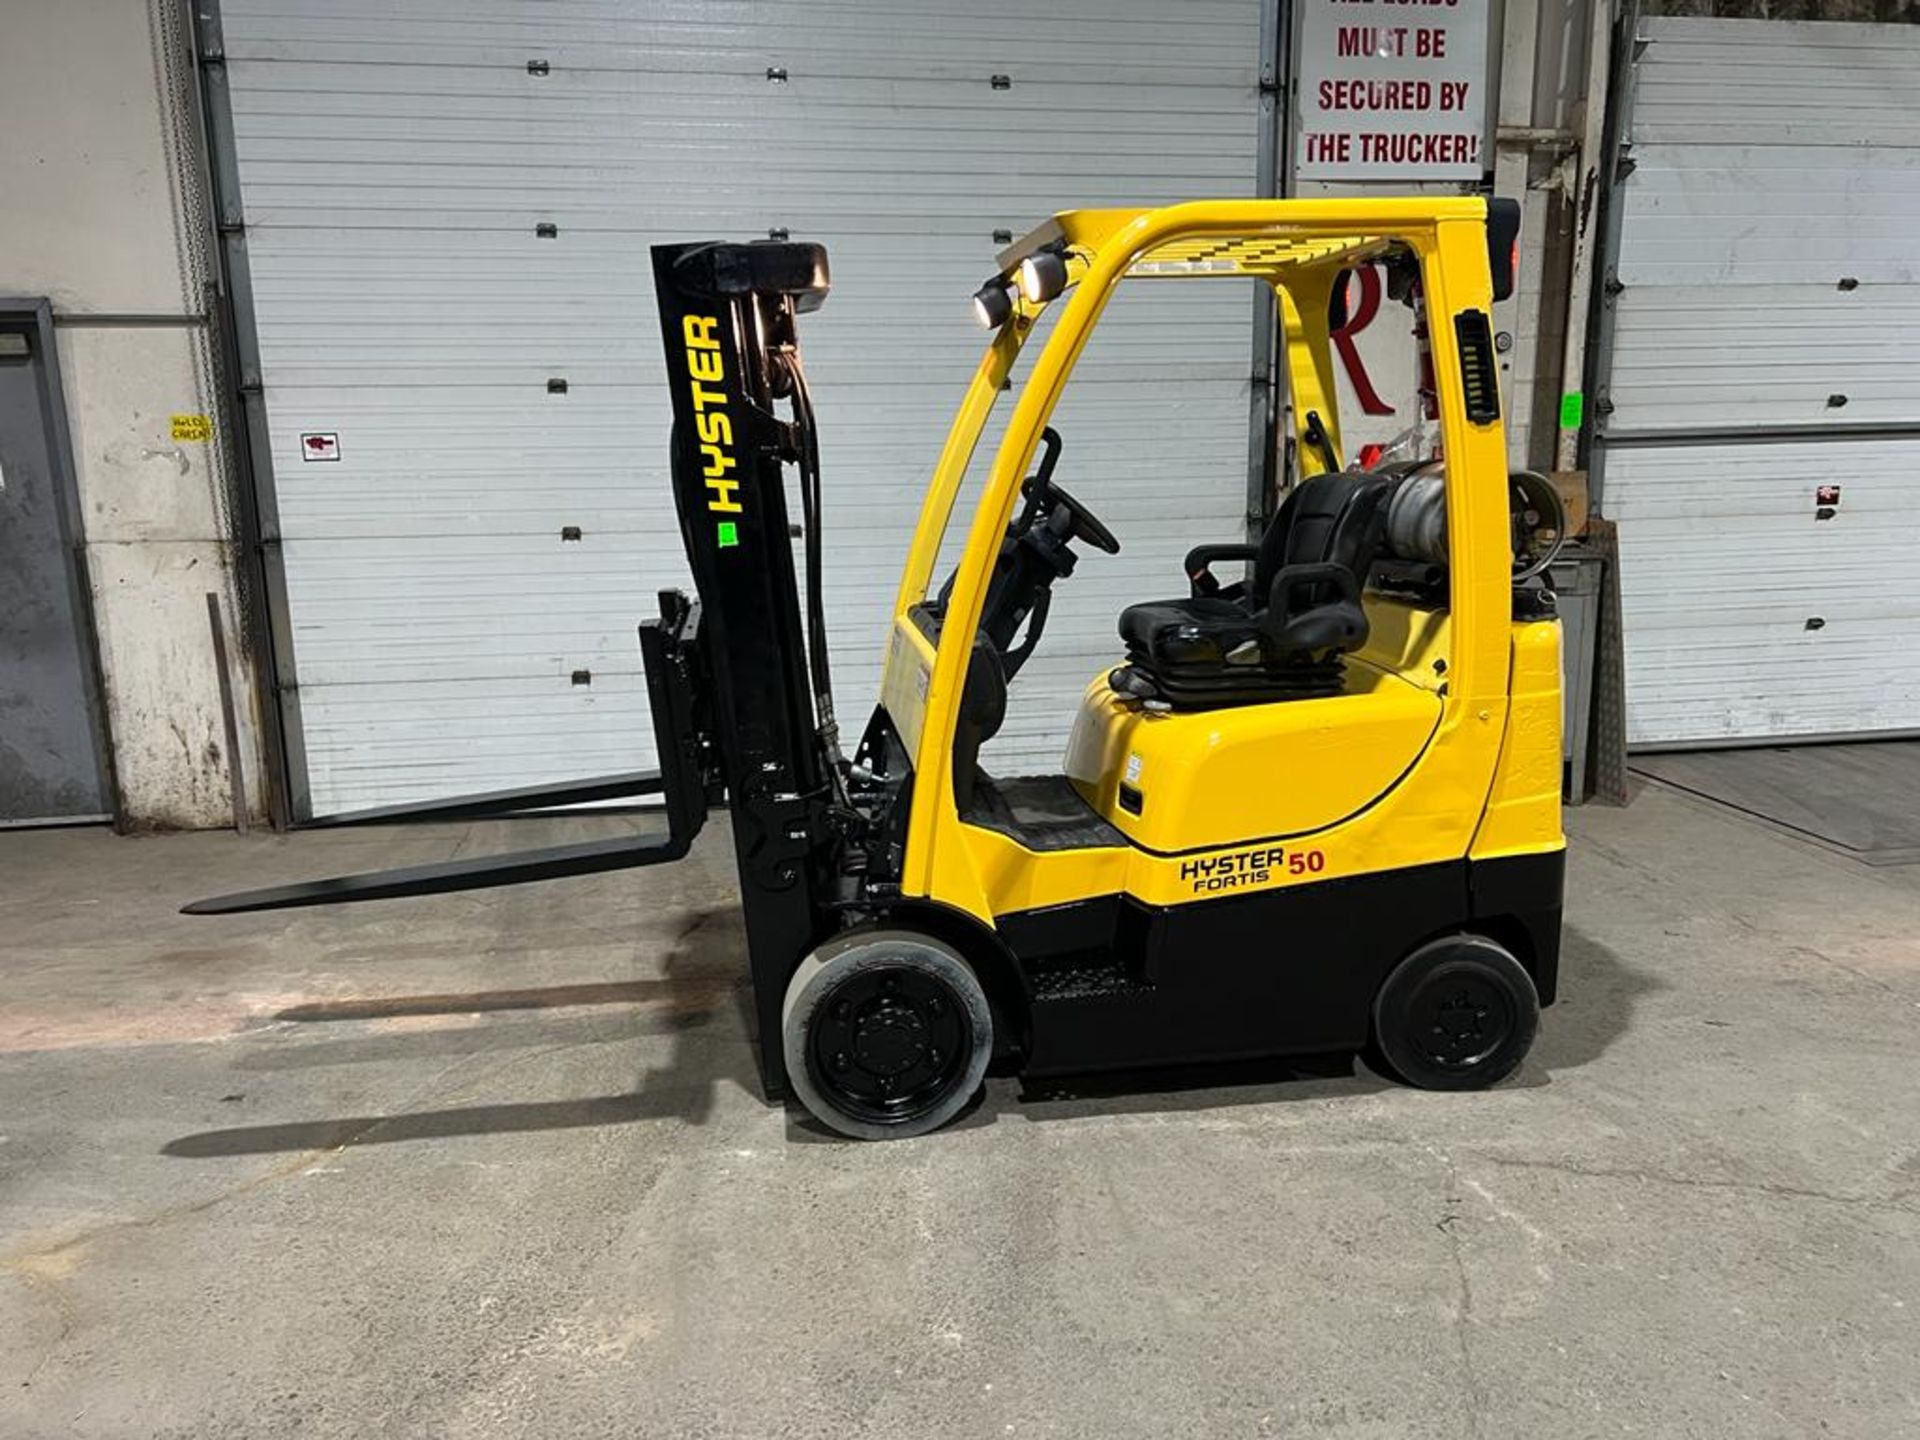 NICE 2015 Hyster model 50 - 5,000lbs Capacity Forklift LPG (Propane) with Sideshift - 3-stage